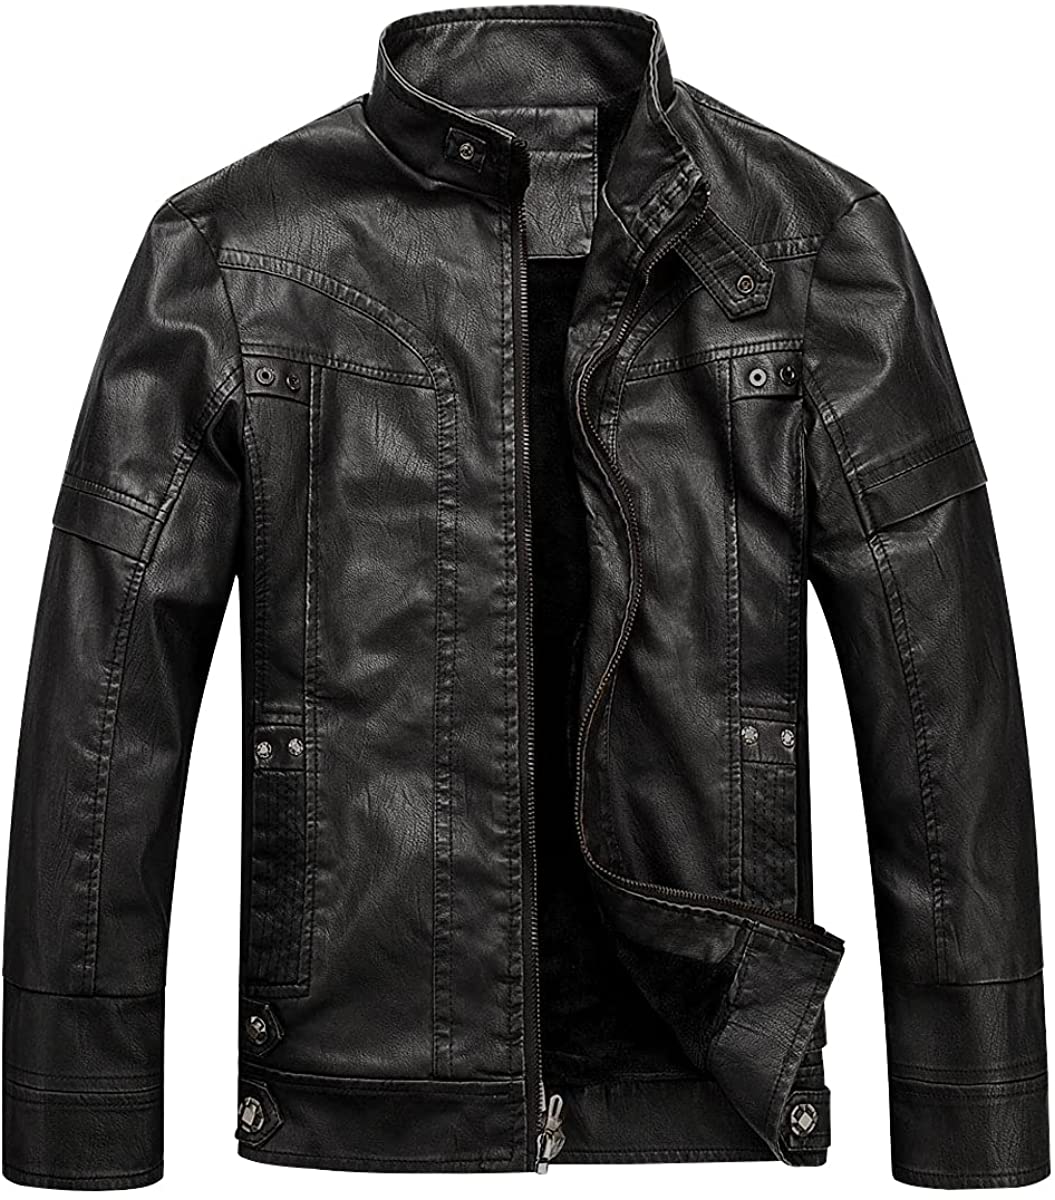 WULFUL Men's Vintage Stand Collar Leather Jacket Motorcycle PU Faux Leather  Outw